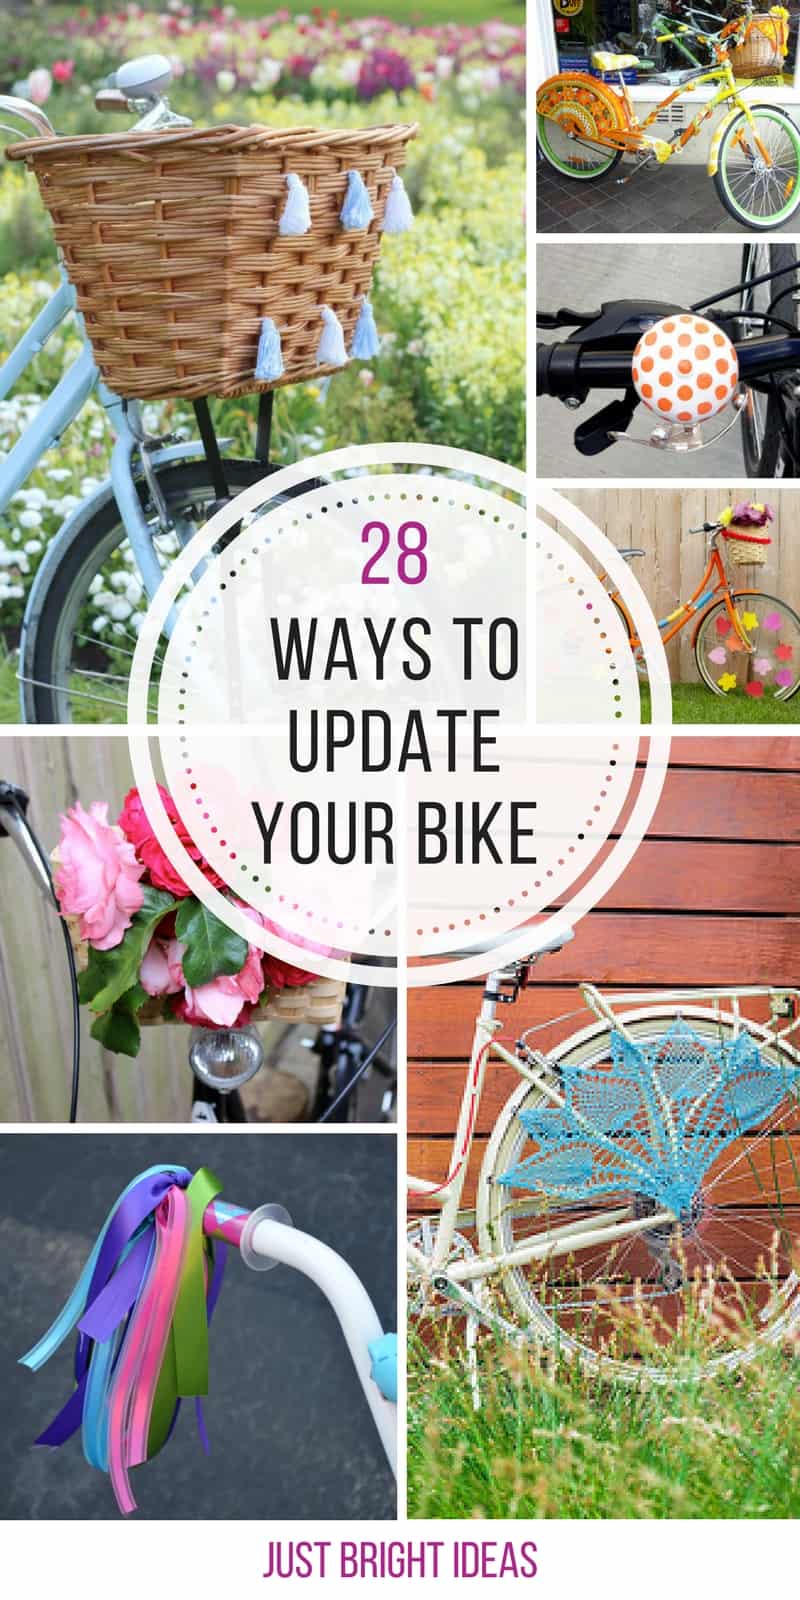 These bike makeover ideas are brilliant! I need to update my bike now!